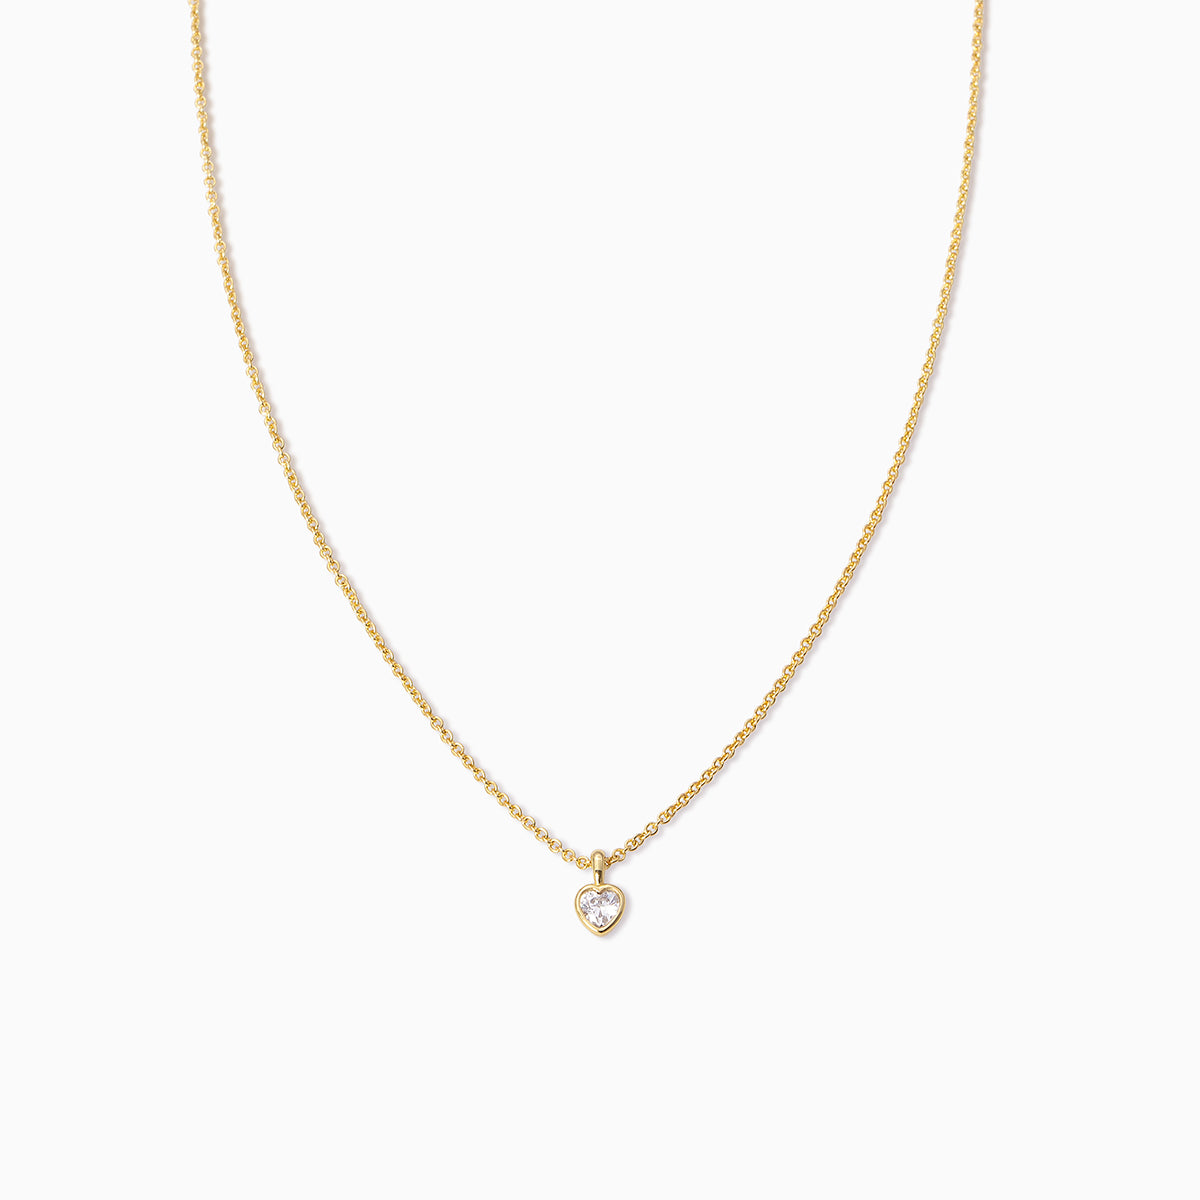 Diamond Heart Necklace | Gold | Product Image | Uncommon James